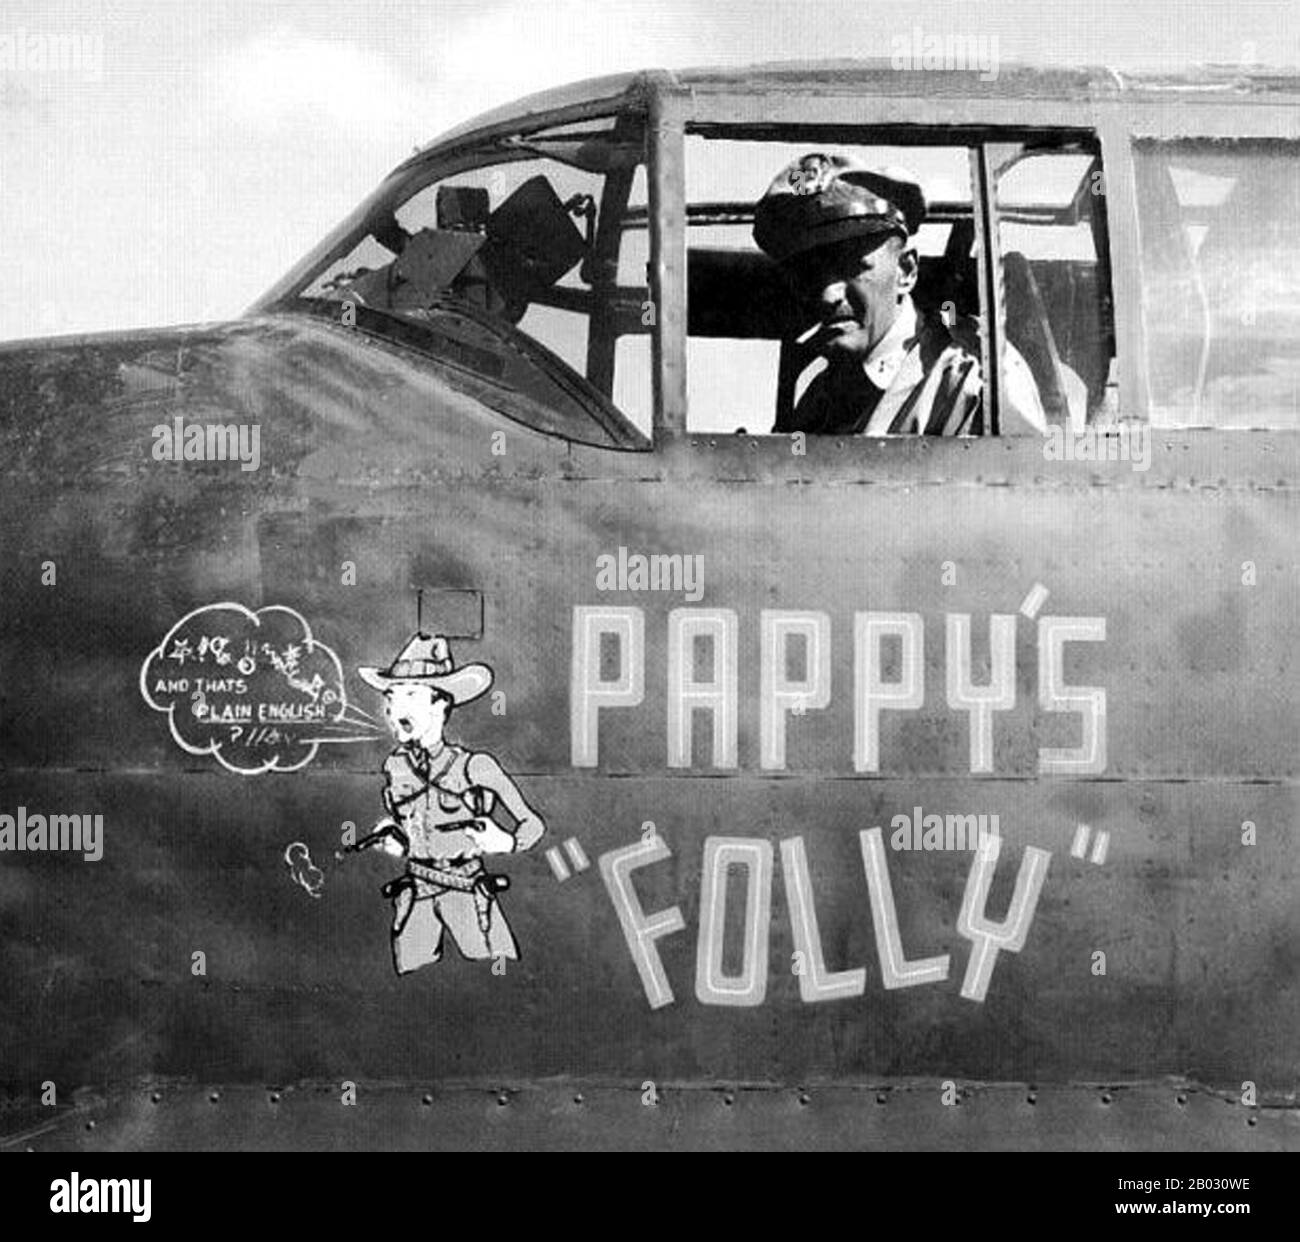 Colonel Paul Irvin 'Pappy' Gunn (October 18, 1899 – October 11, 1957) was a United States naval aviator known mainly for his actions in the Second World War as an officer in the United States Army Air Forces.  He was known as an expert in dare-devil low-level flying, and recognized for numerous feats of heroism and mechanical ingenuity, especially modifications to the Douglas A-20 Havoc light bomber and B-25 Mitchell medium bomber that turned them into attack aircraft. Stock Photo